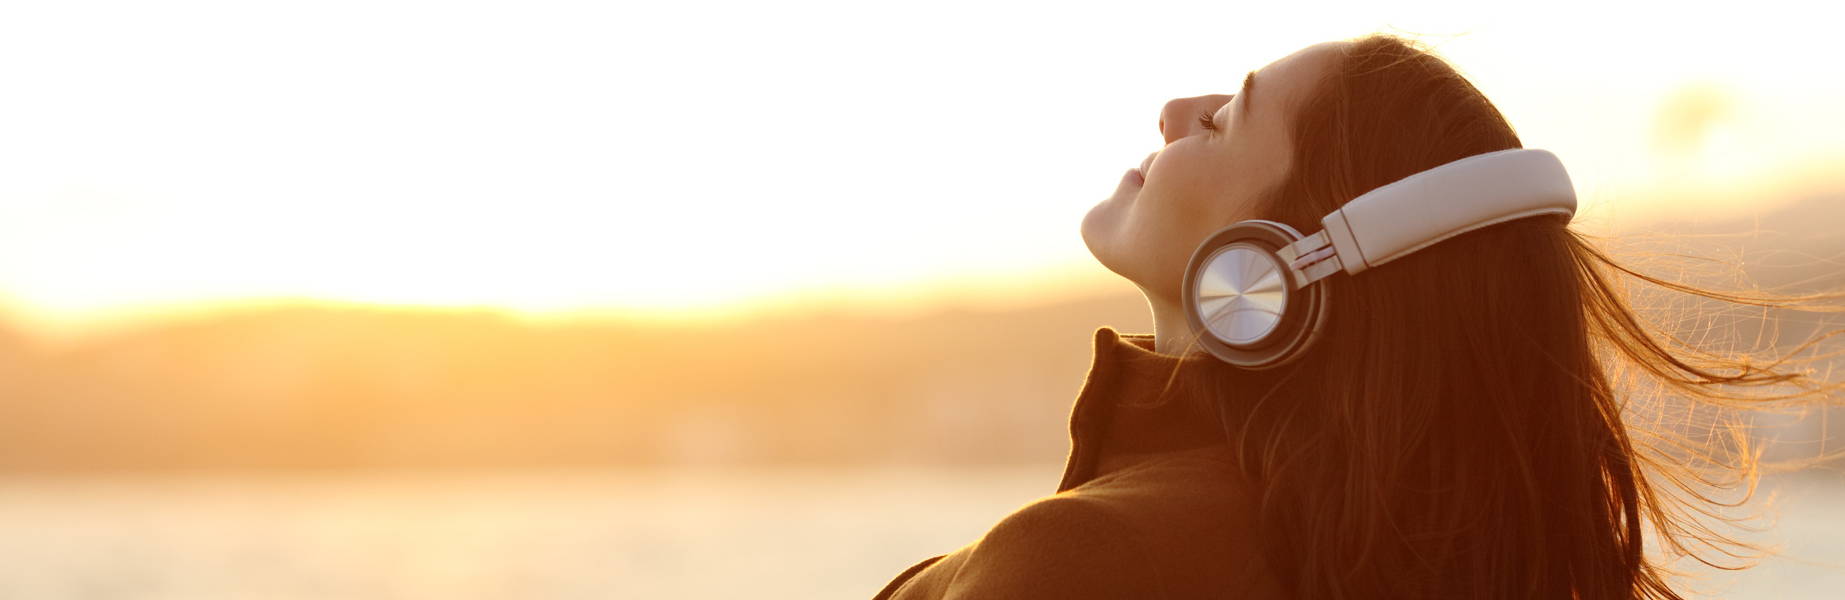 Woman listening to headphones with sunset in  foreground